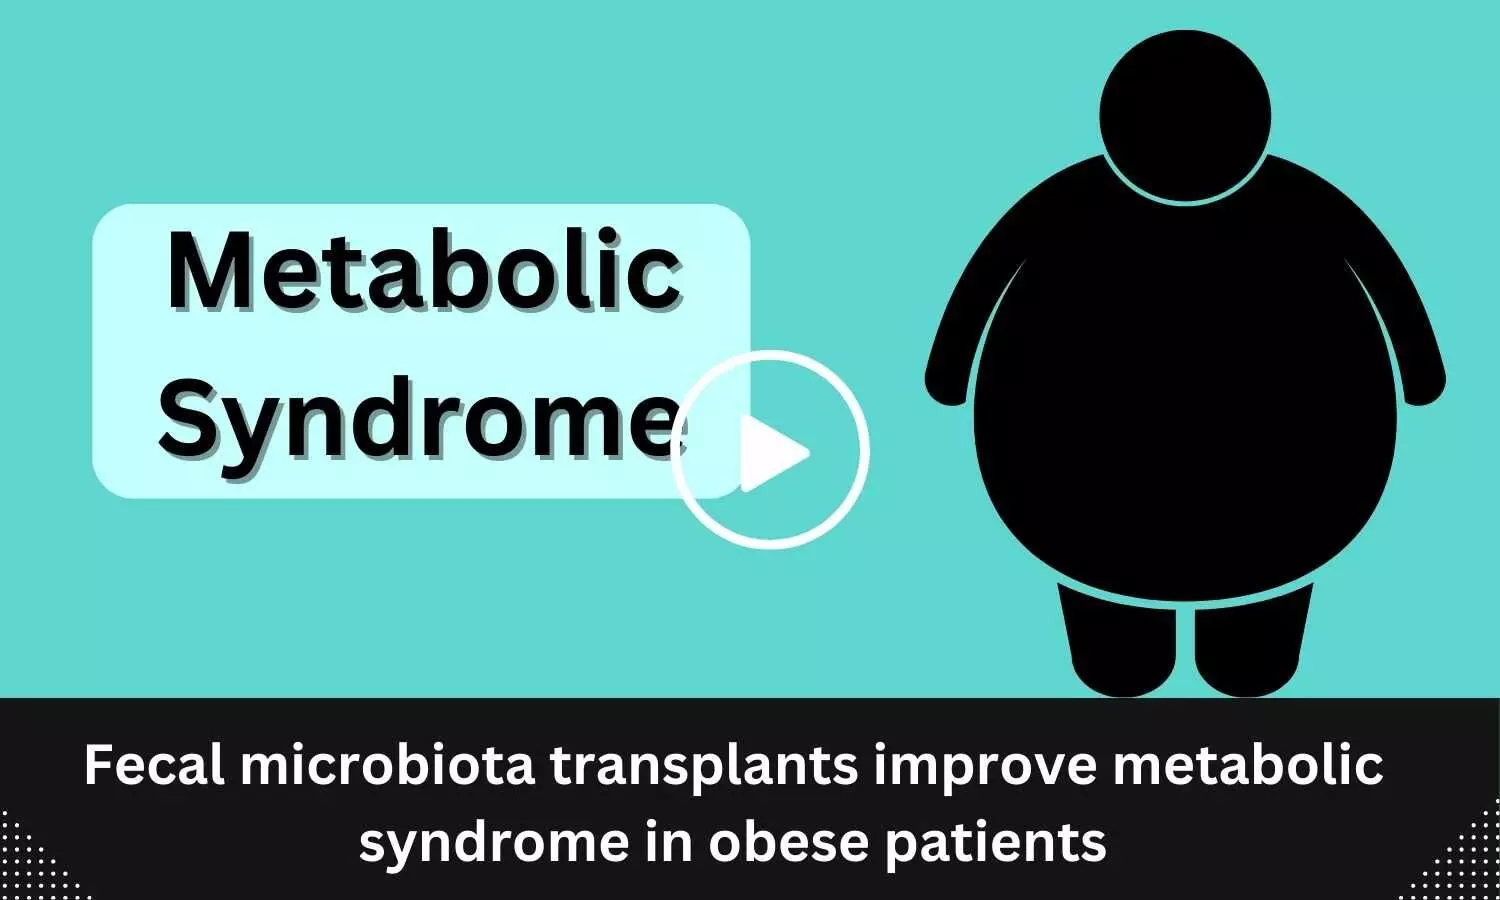 Fecal microbiota transplants improve metabolic syndrome in obese patients